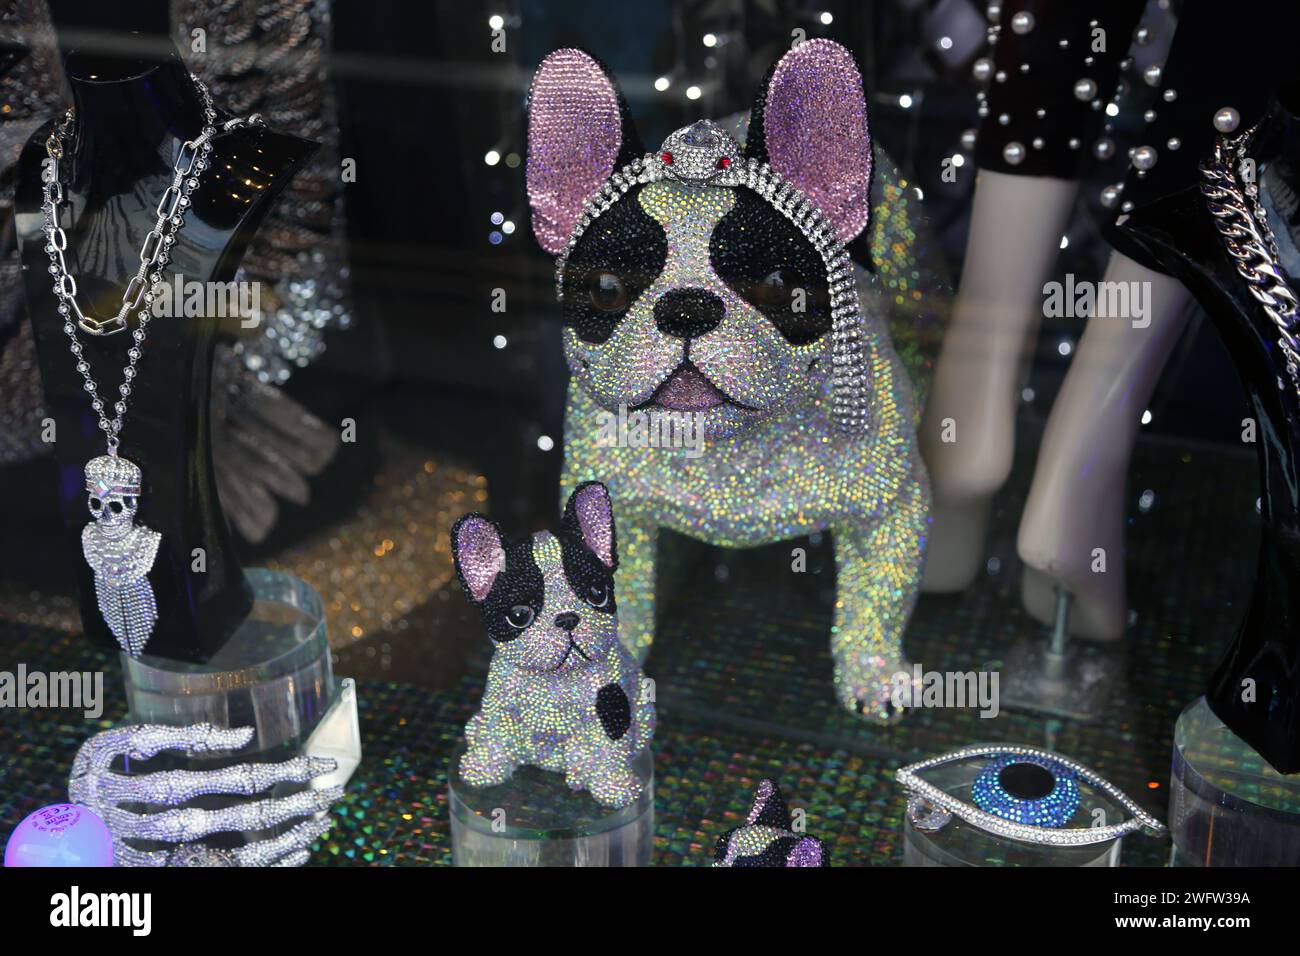 Bejewelled French Bulldog Ornaments and Jewellery in Shop Window Chelsea London England Stock Photo